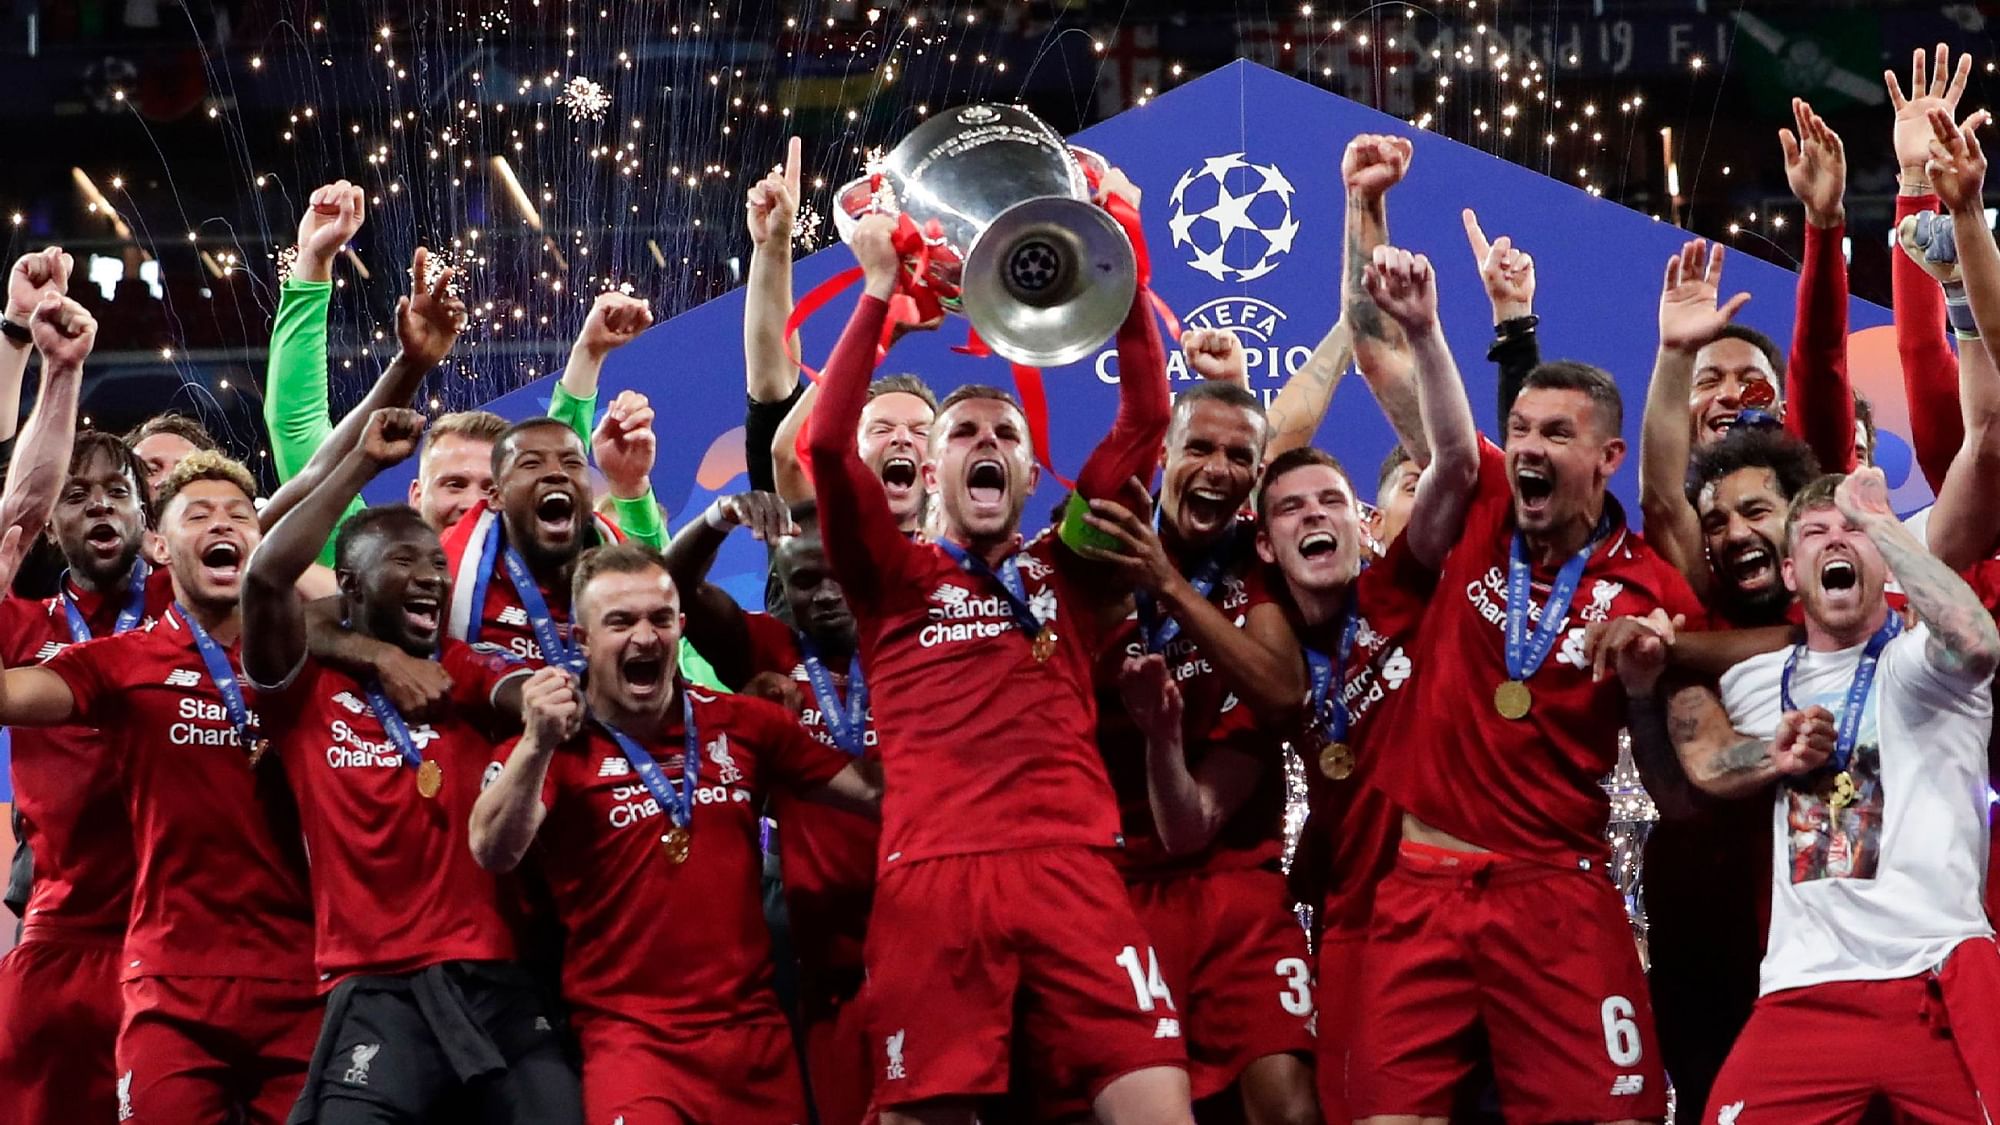 Liverpool won their sixth European title on Saturday with a 2-0 win against Totteham Hotspur in the Champions League final.